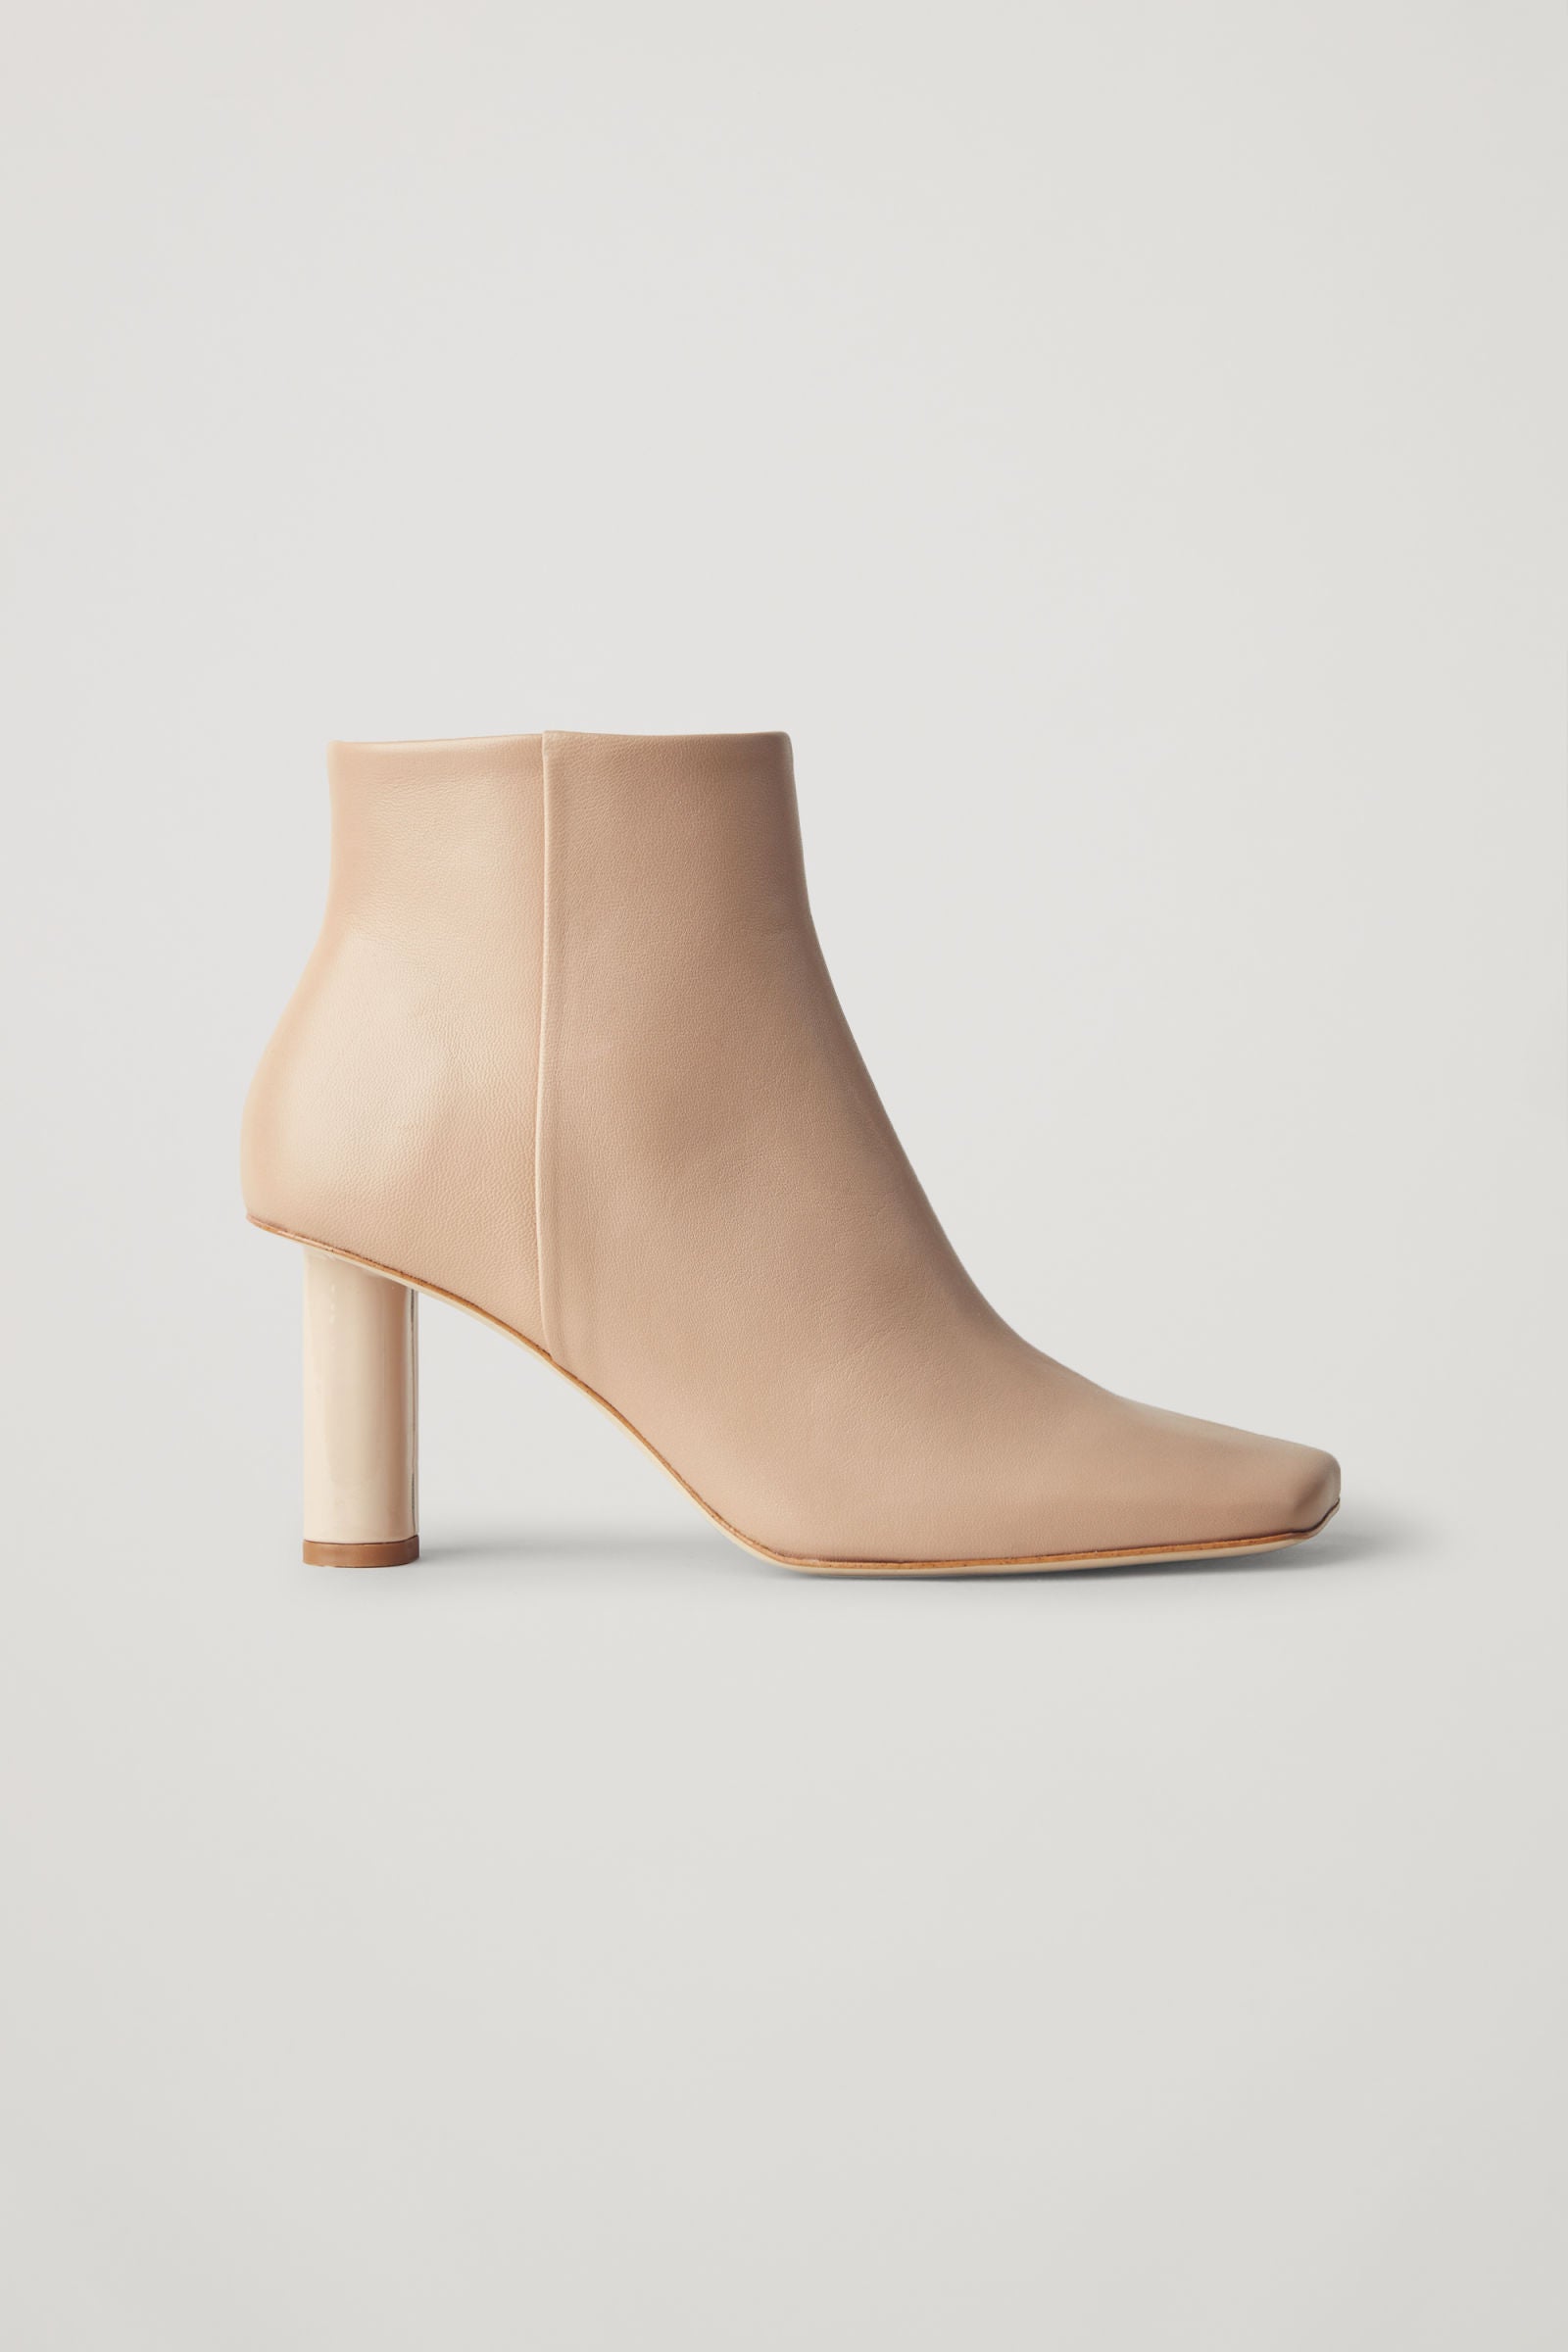 COS + Square Toe Leather Ankle Boots